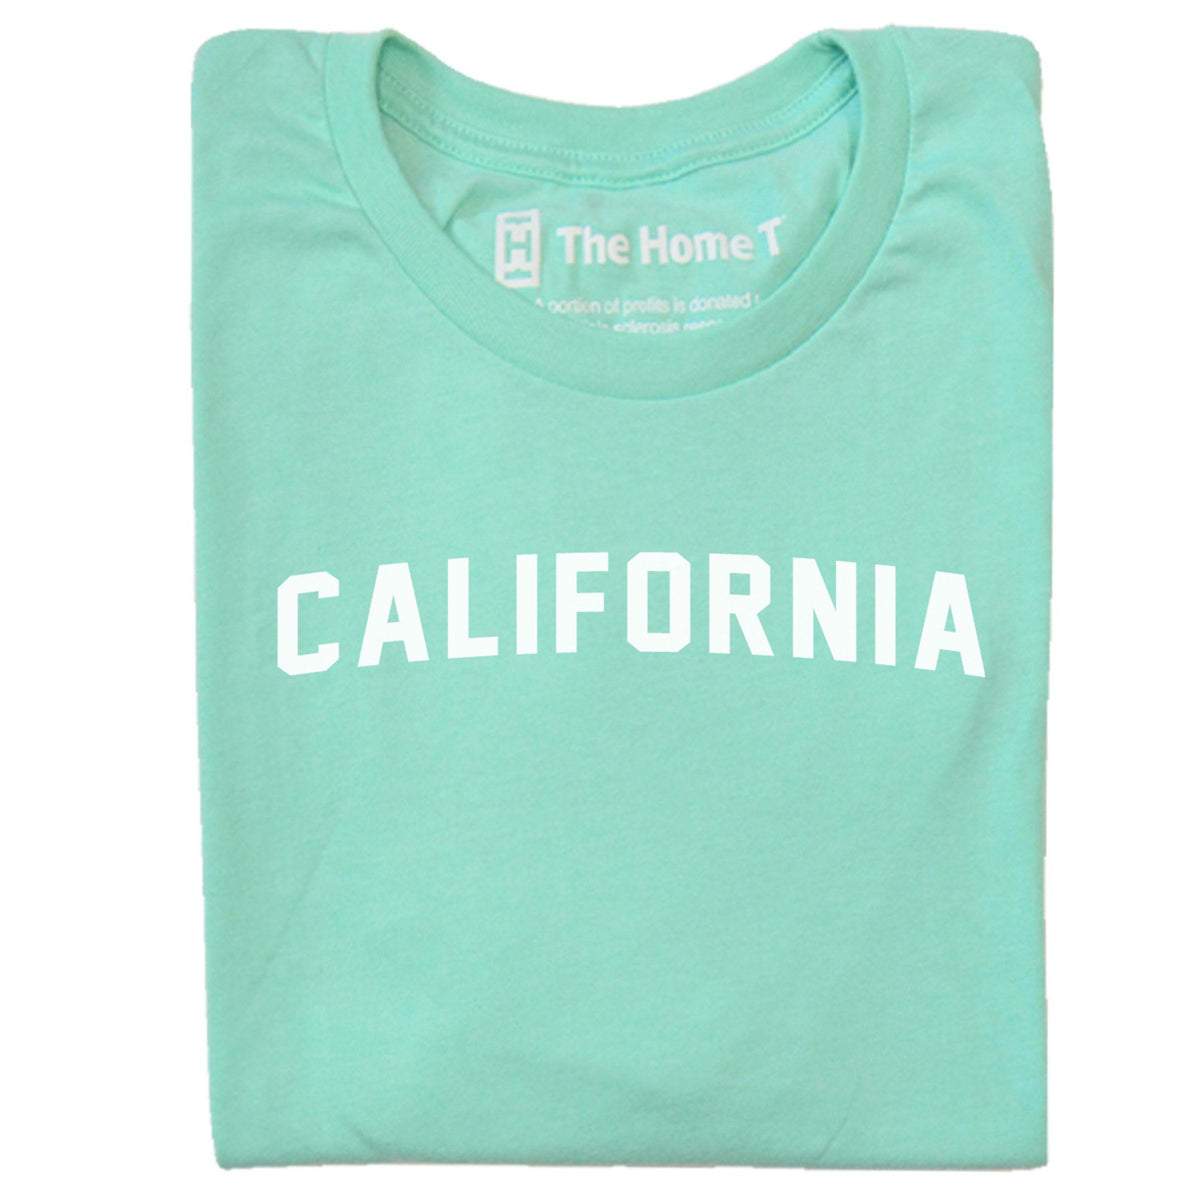 California Arched The Home T XS Mint